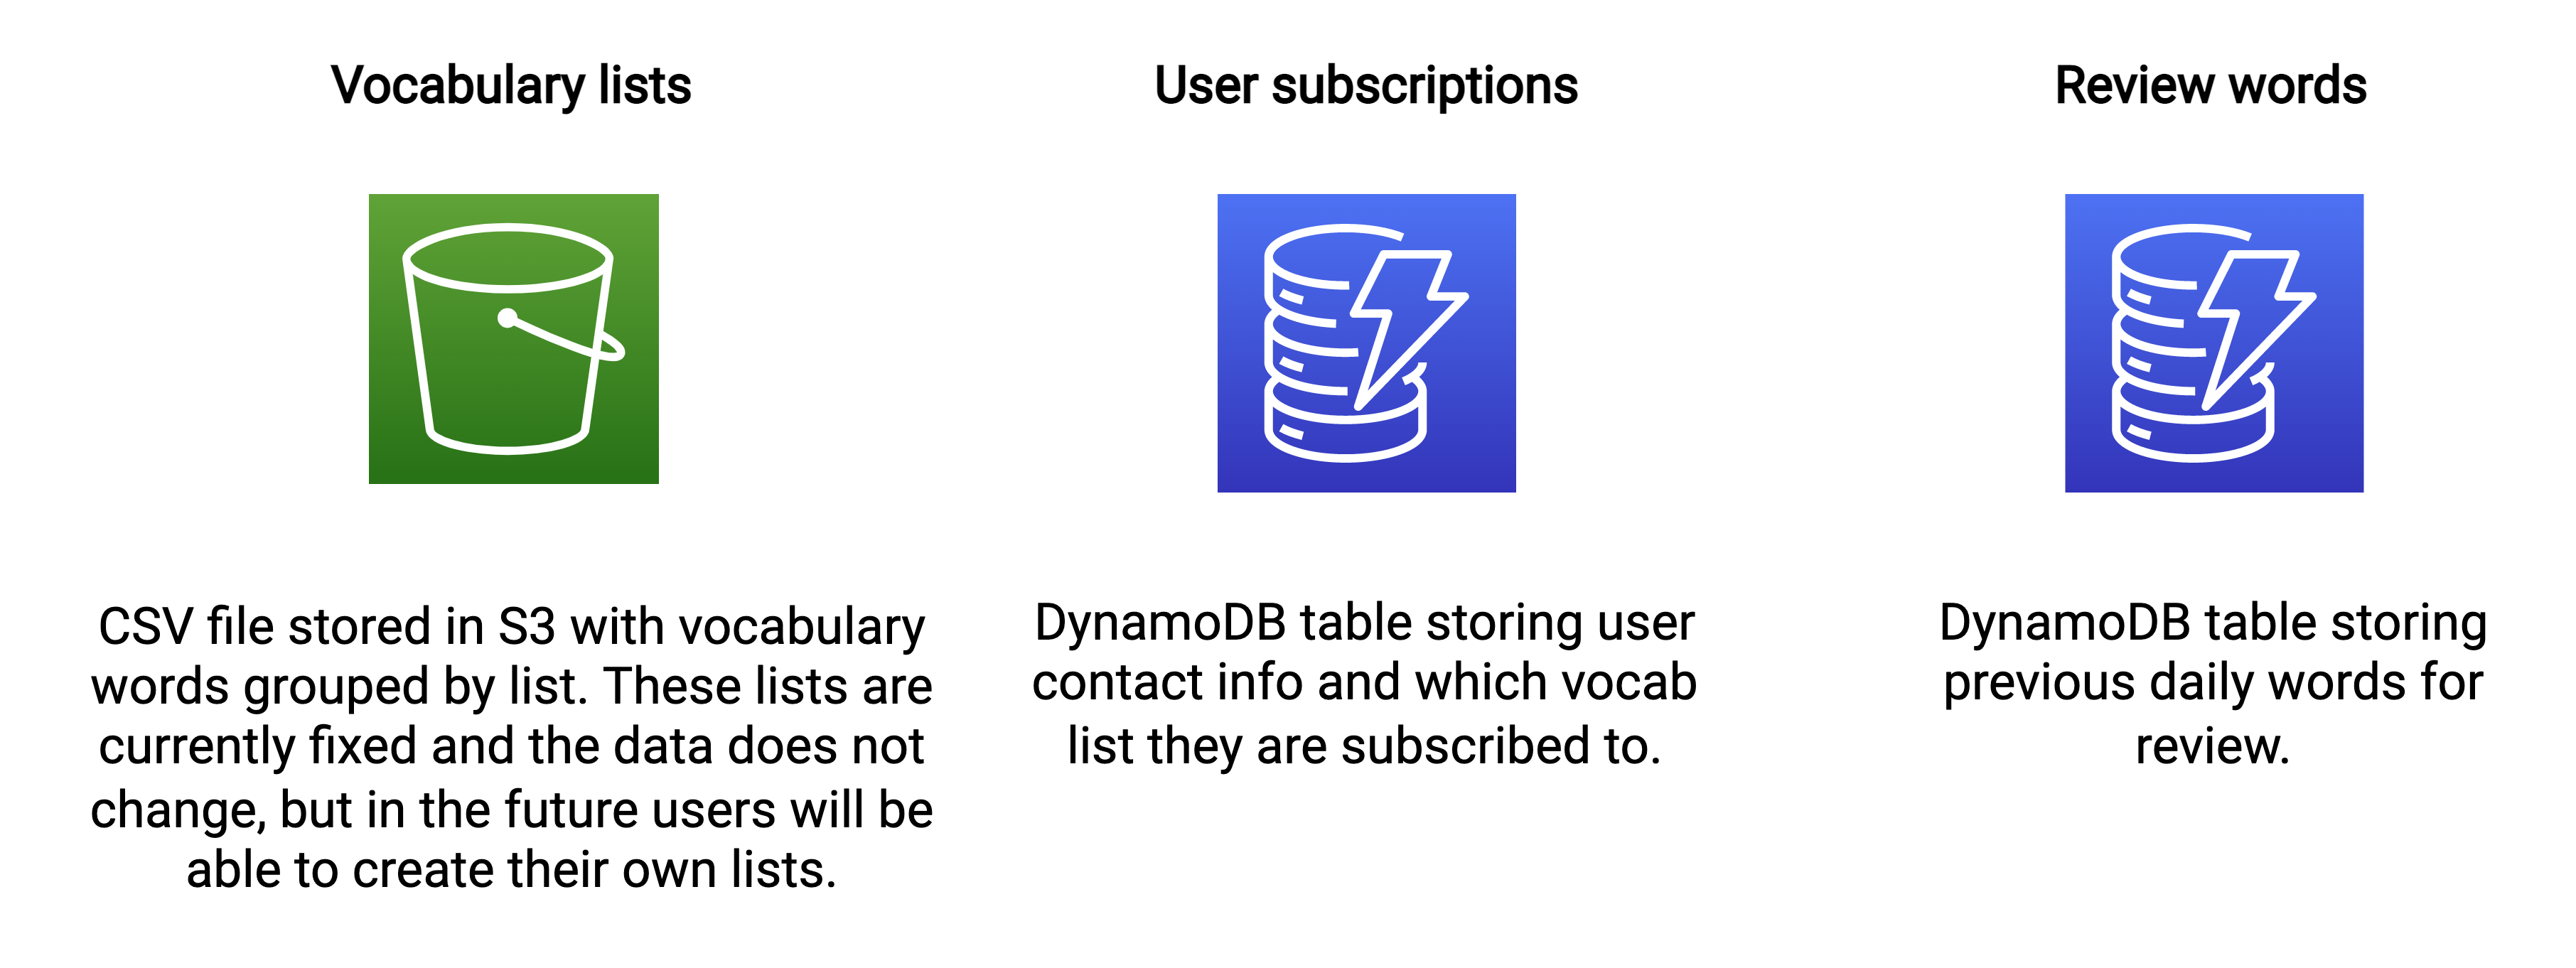 Existing database architecture - S3 CSV file and two DynamoDB tables